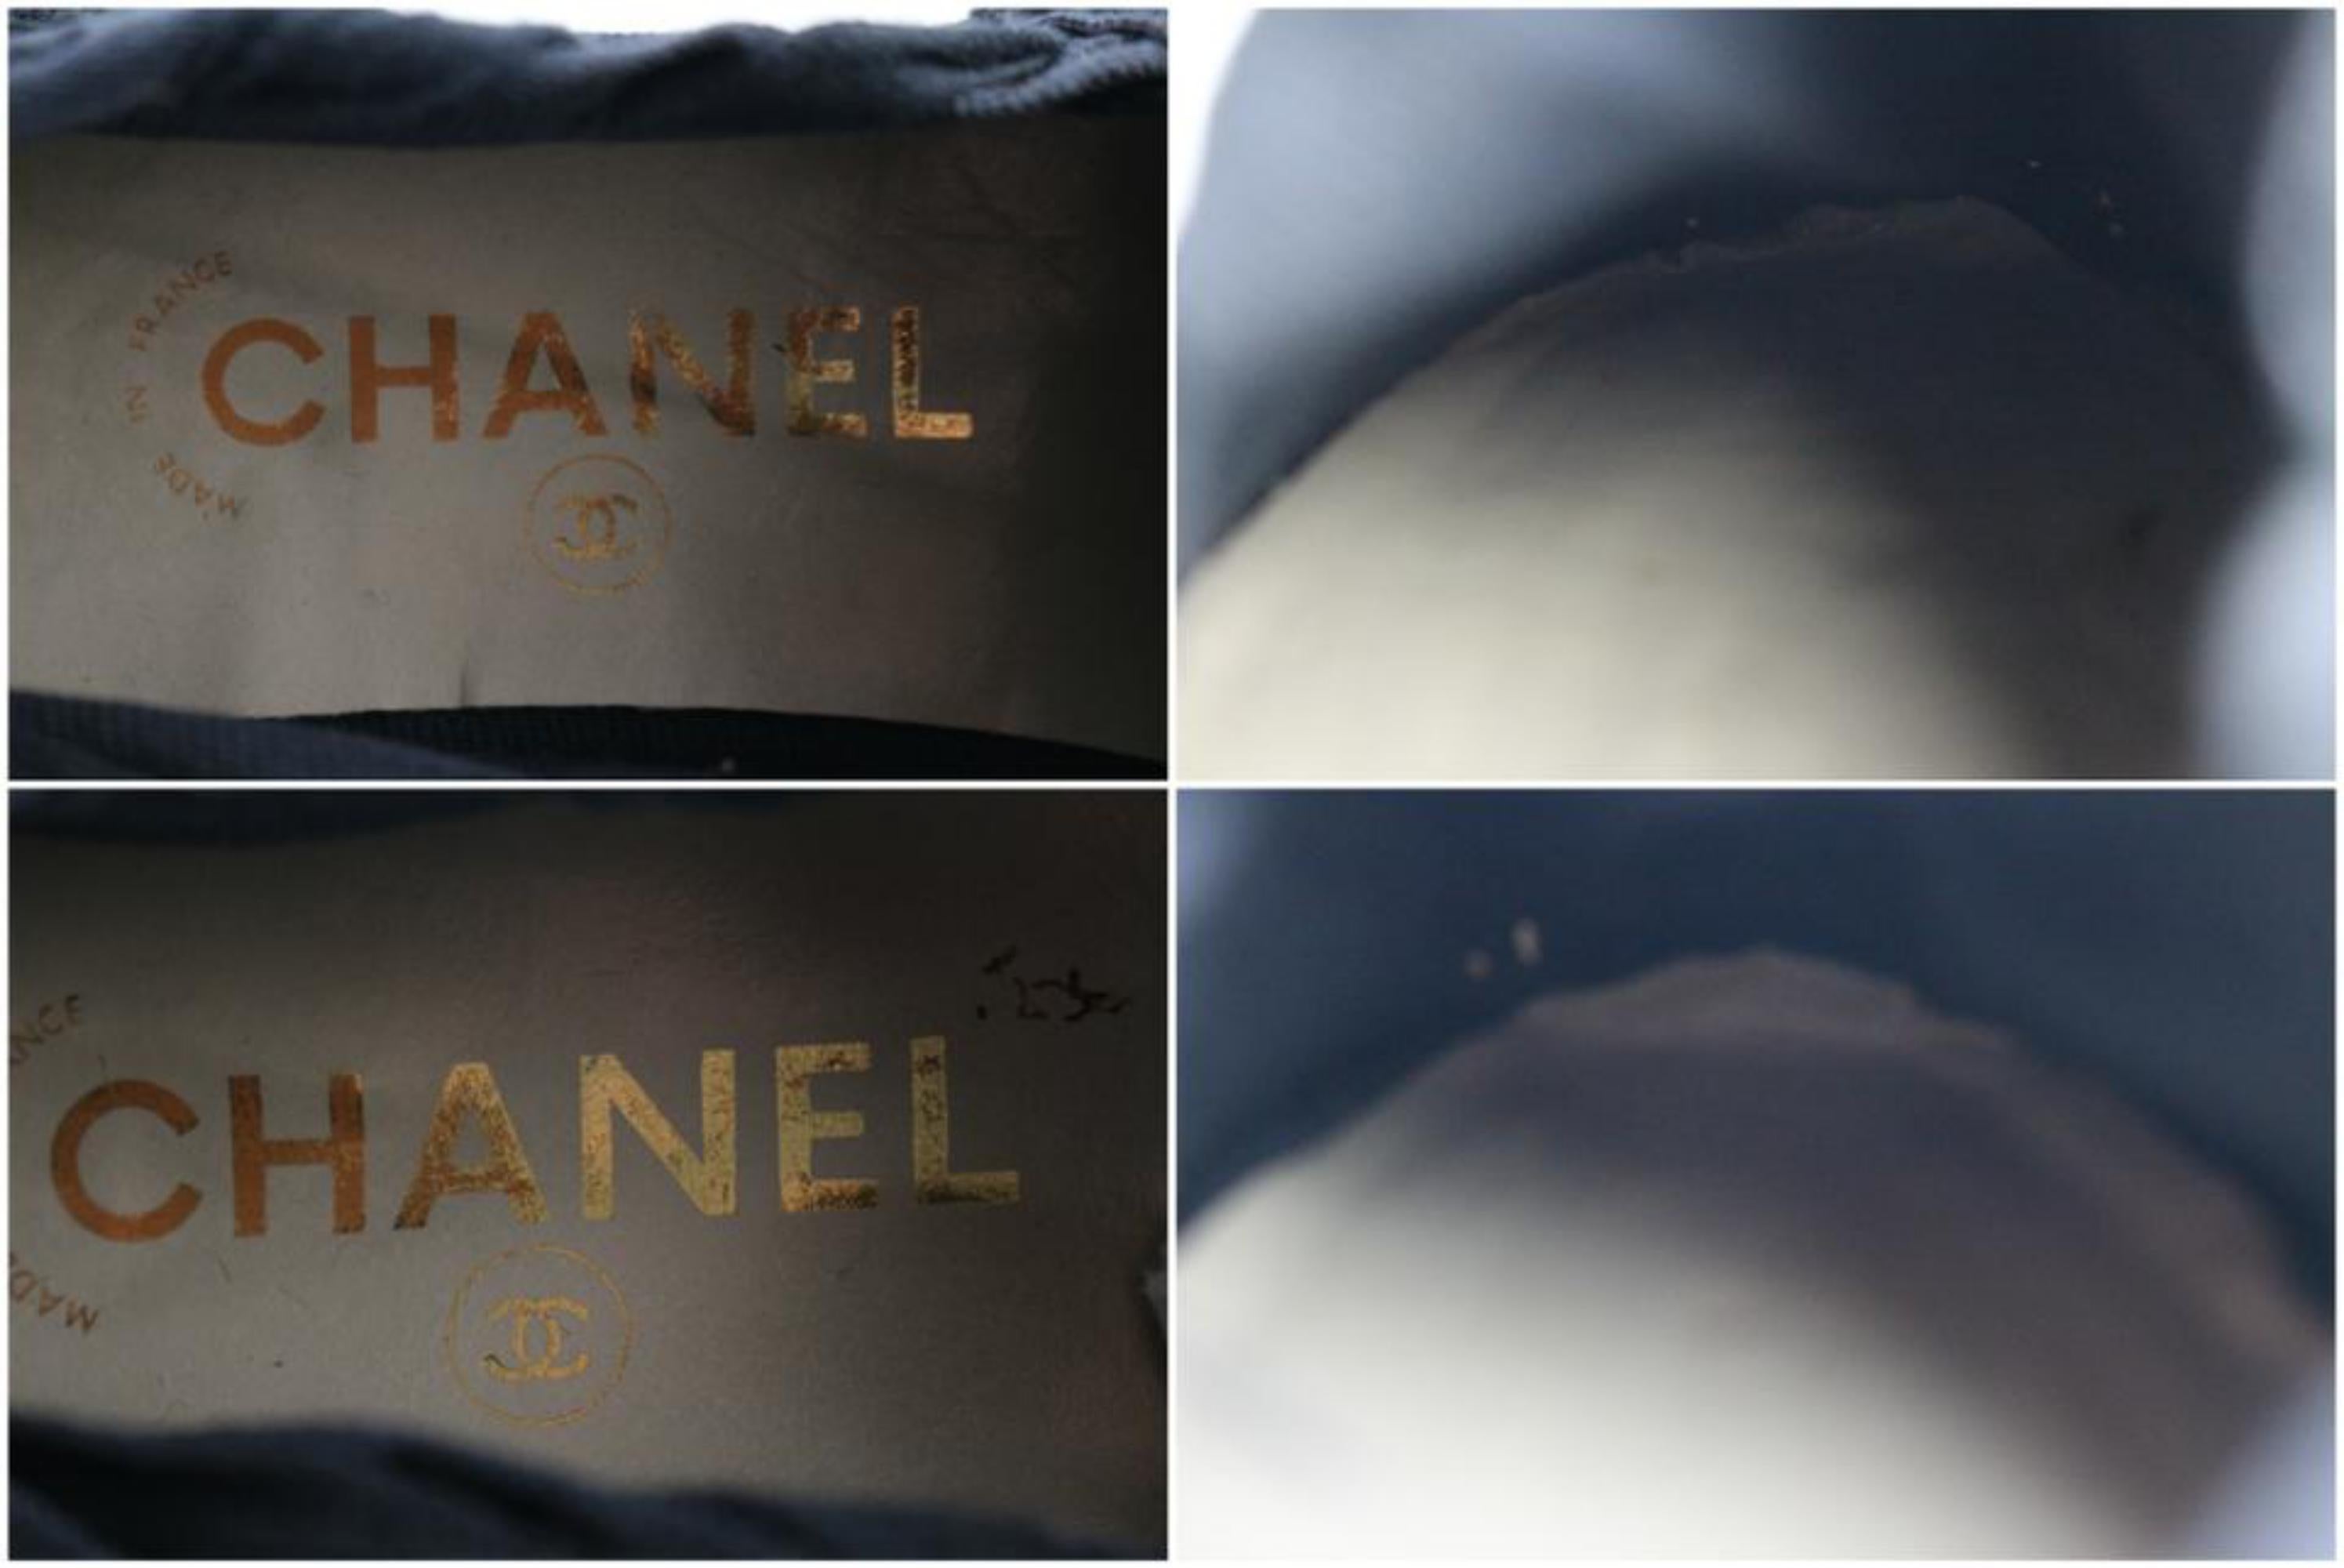 Chanel Black Ballerina Strappy Tie Espadrilles 220689 Flats In Good Condition For Sale In Forest Hills, NY